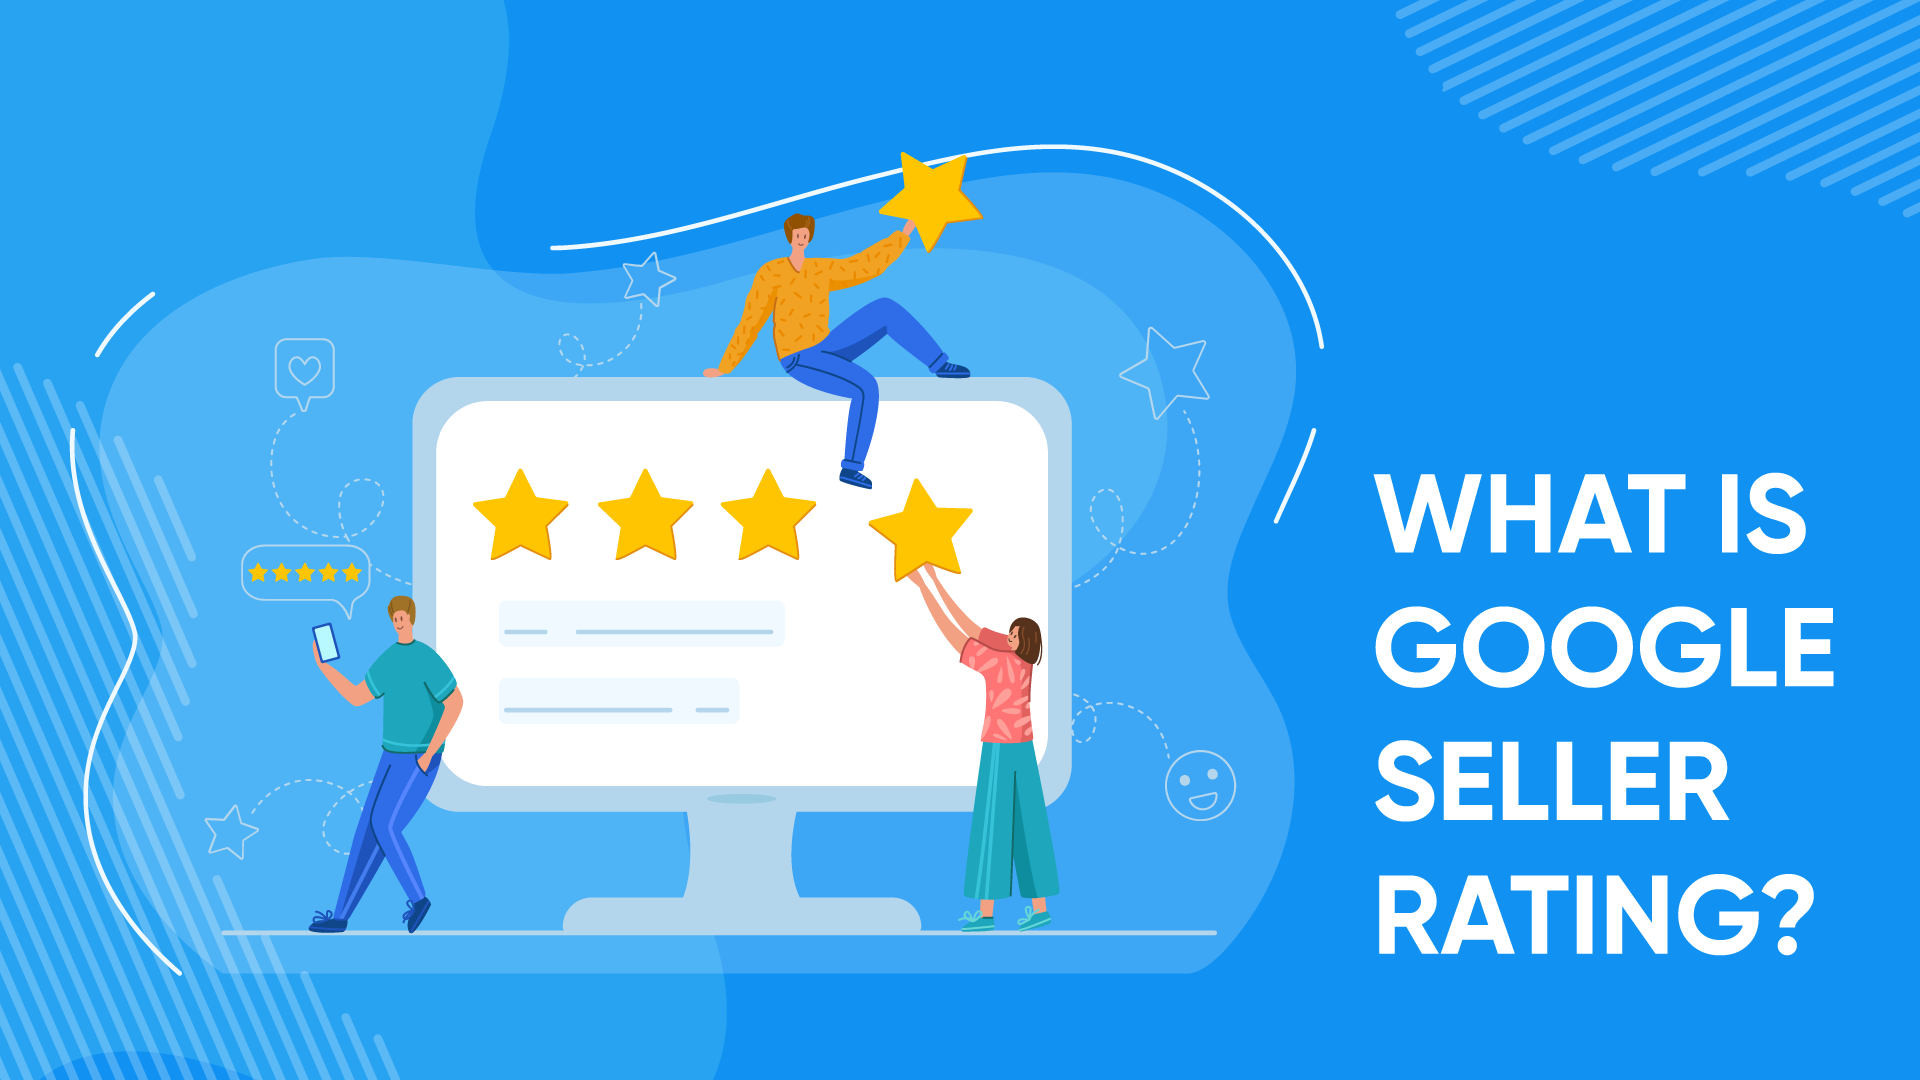 What is Google seller rating